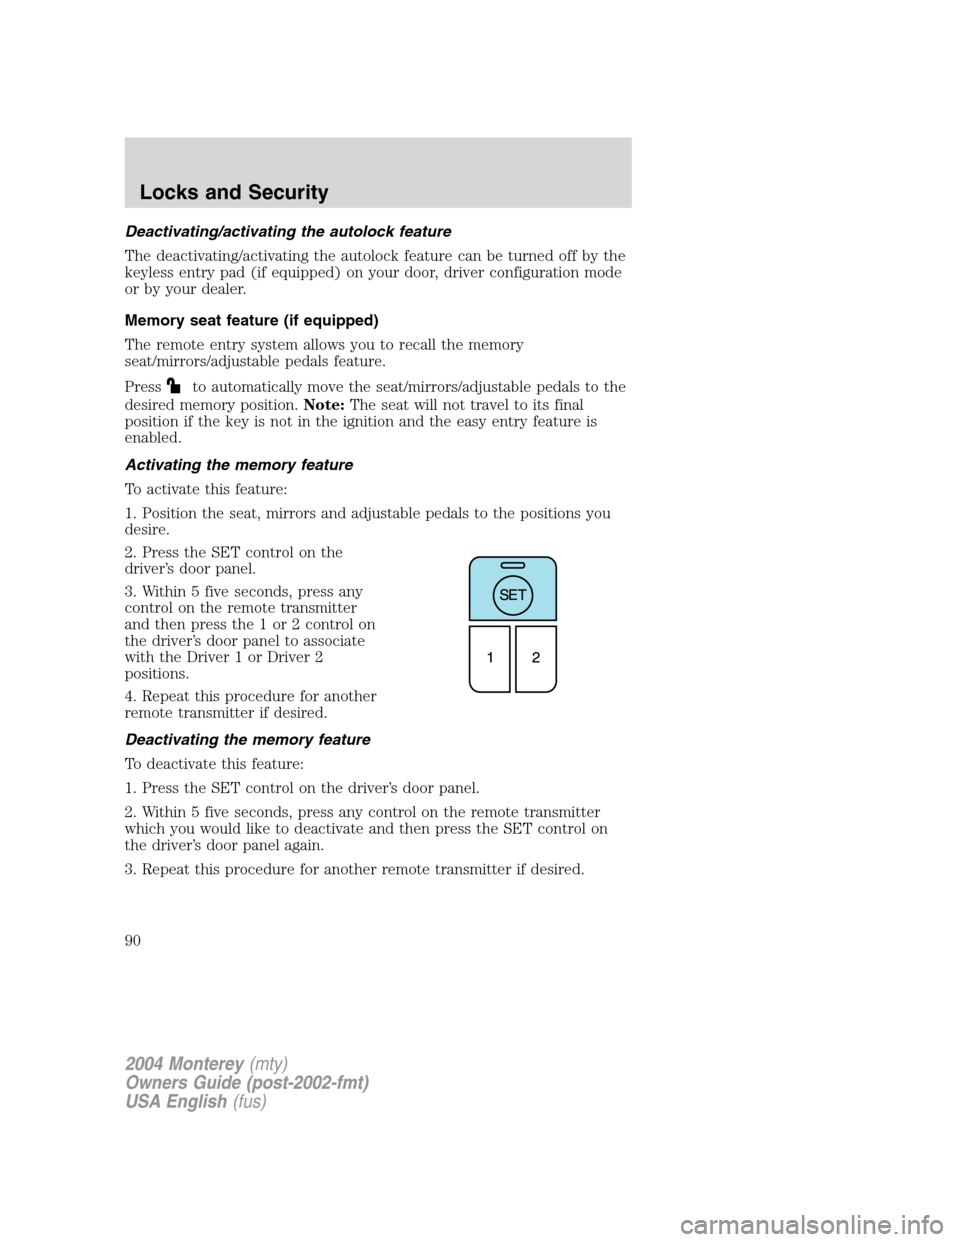 Mercury Monterey 2004  Owners Manuals Deactivating/activating the autolock feature
The deactivating/activating the autolock feature can be turned off by the
keyless entry pad (if equipped) on your door, driver configuration mode
or by you